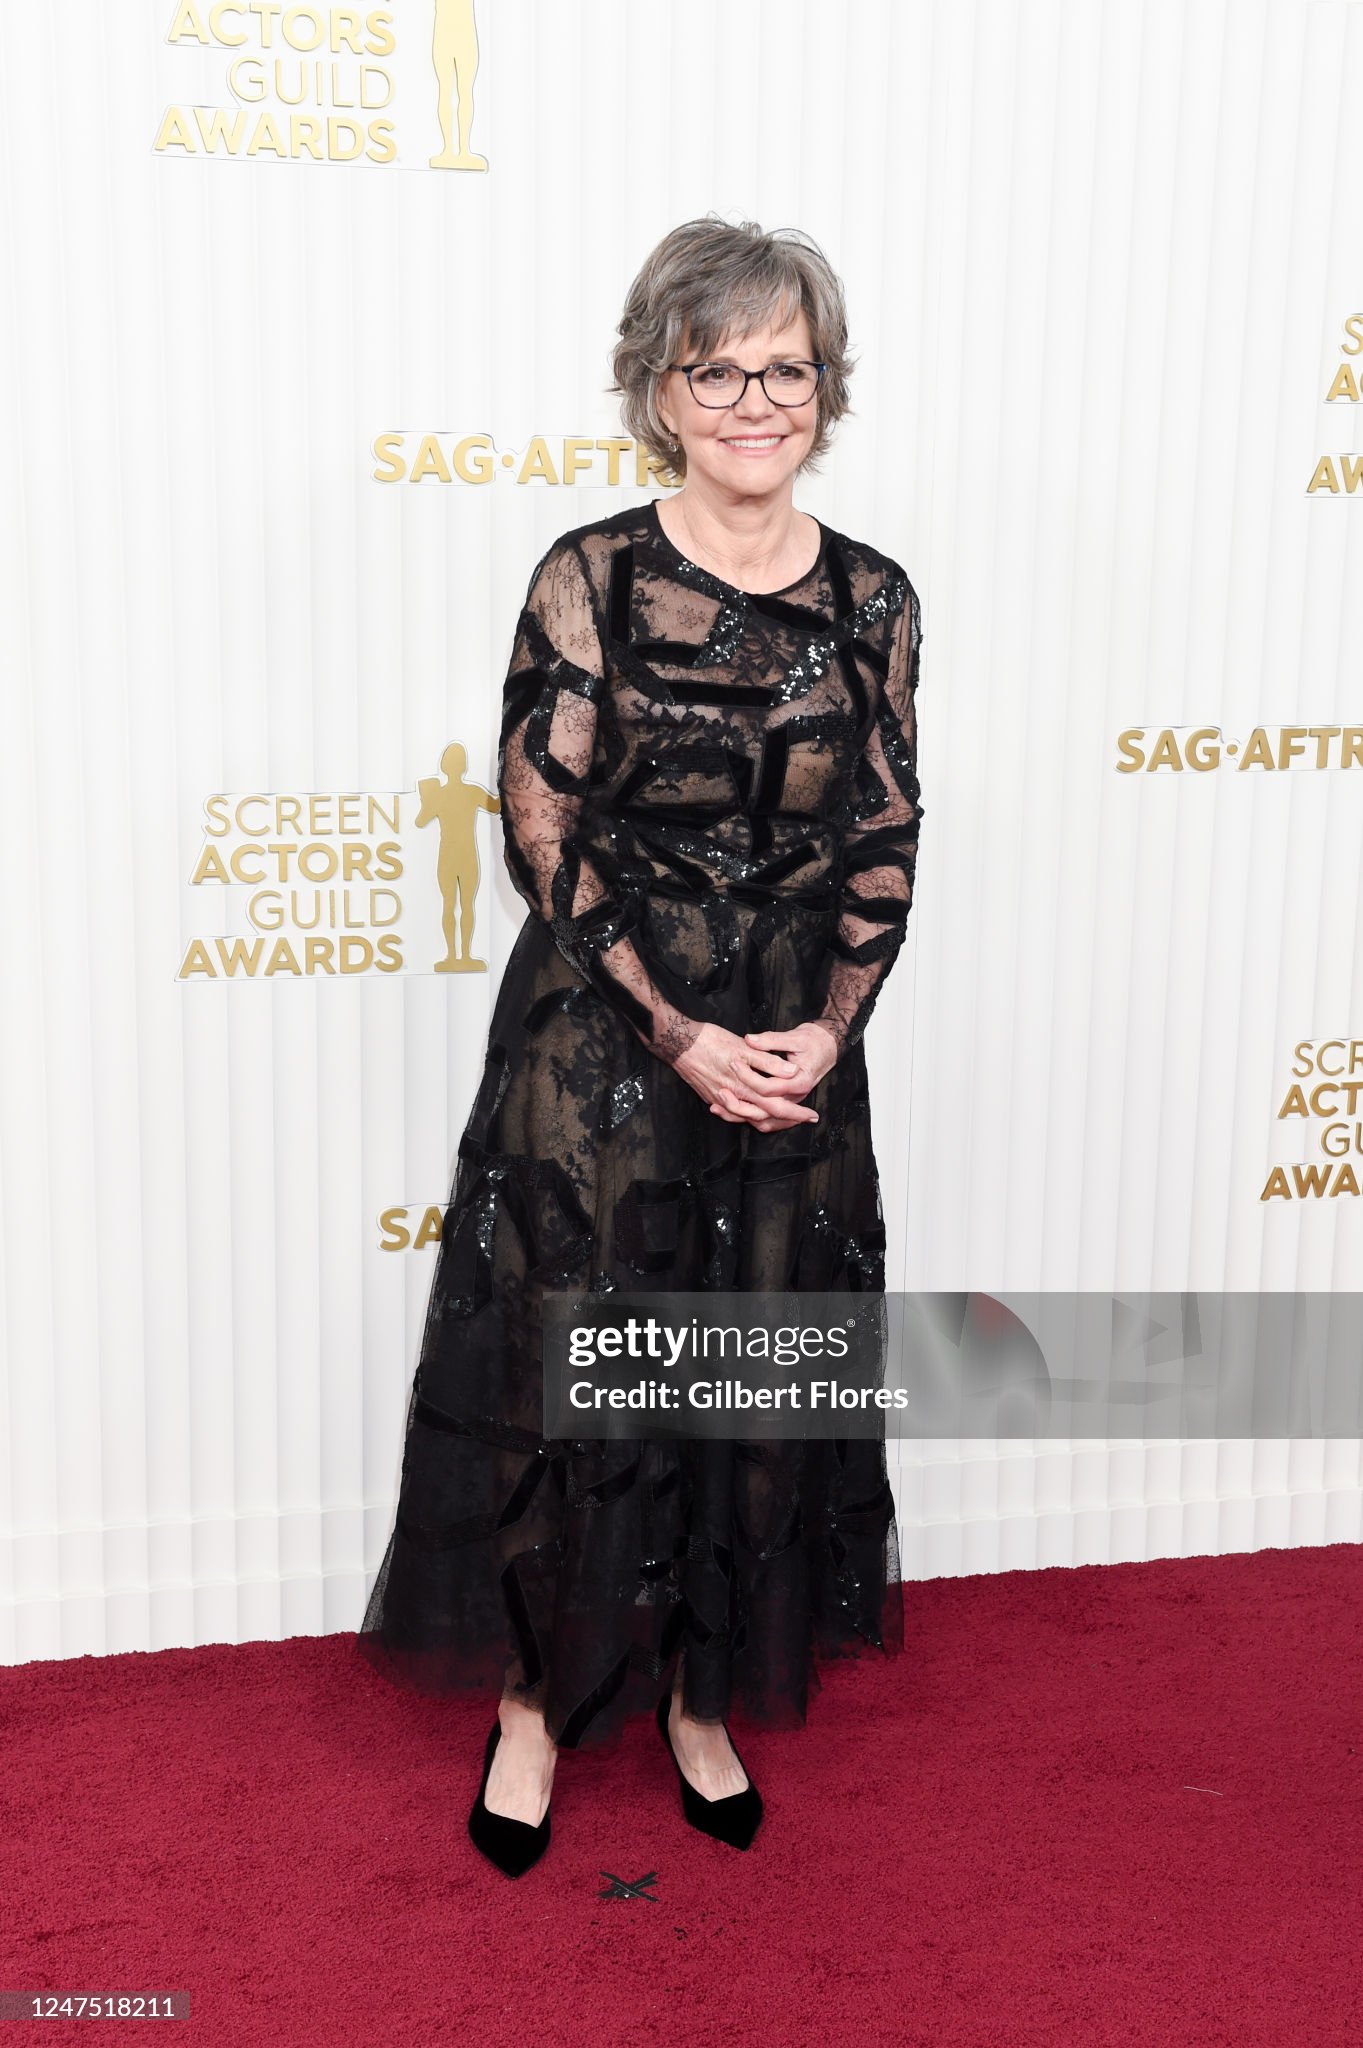 sally-field-at-the-29th-annual-screen-actors-guild-awards-held-at-the-fairmont-century-plaza.jpg